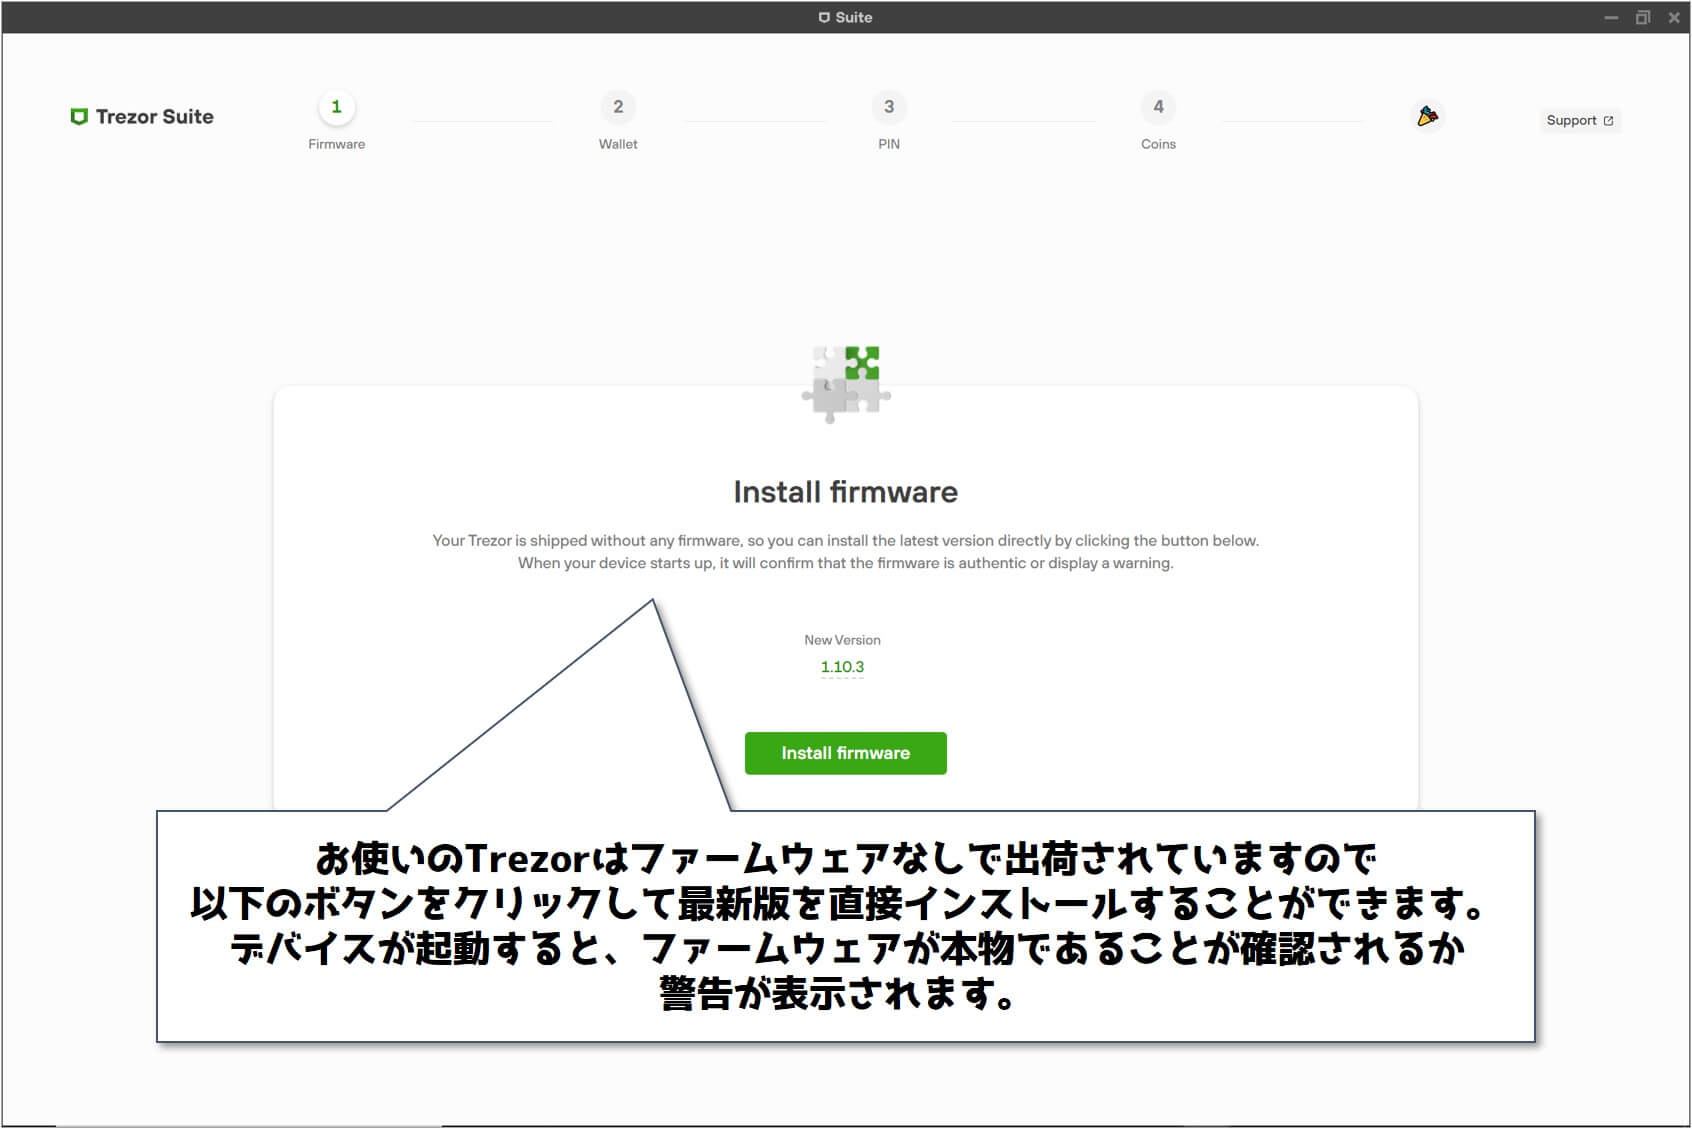 「Install firmware」を選択